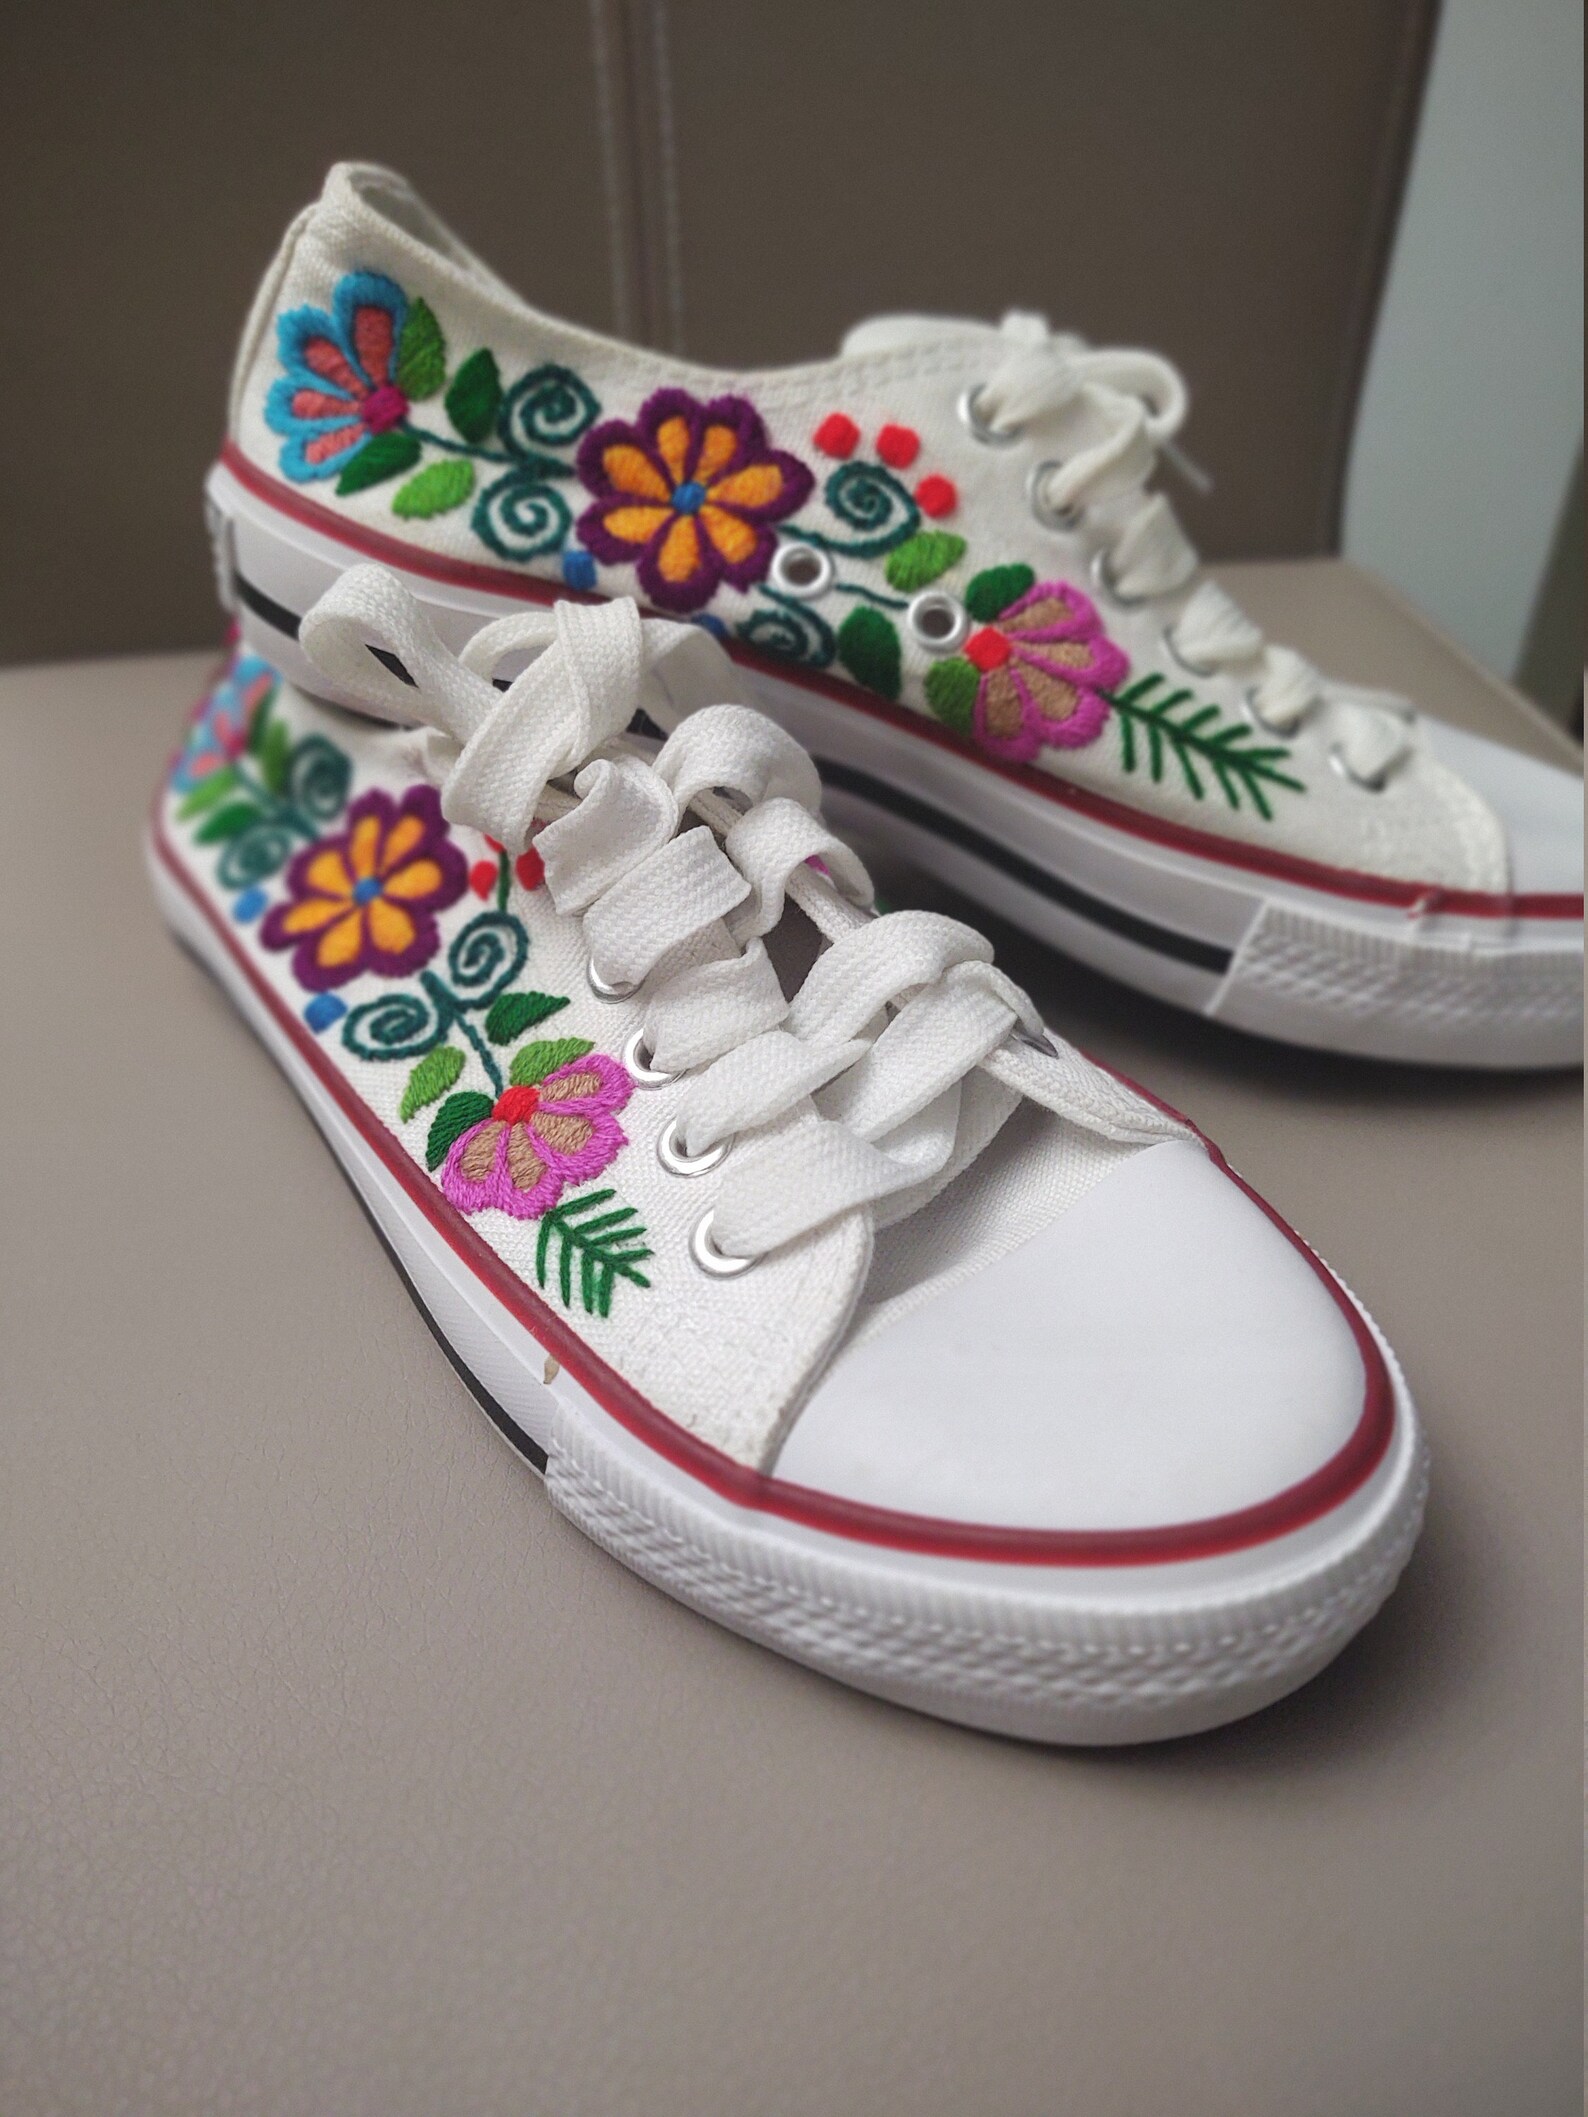 White Embroidered Tennis Shoes Floral Embroidered Tennis | Etsy